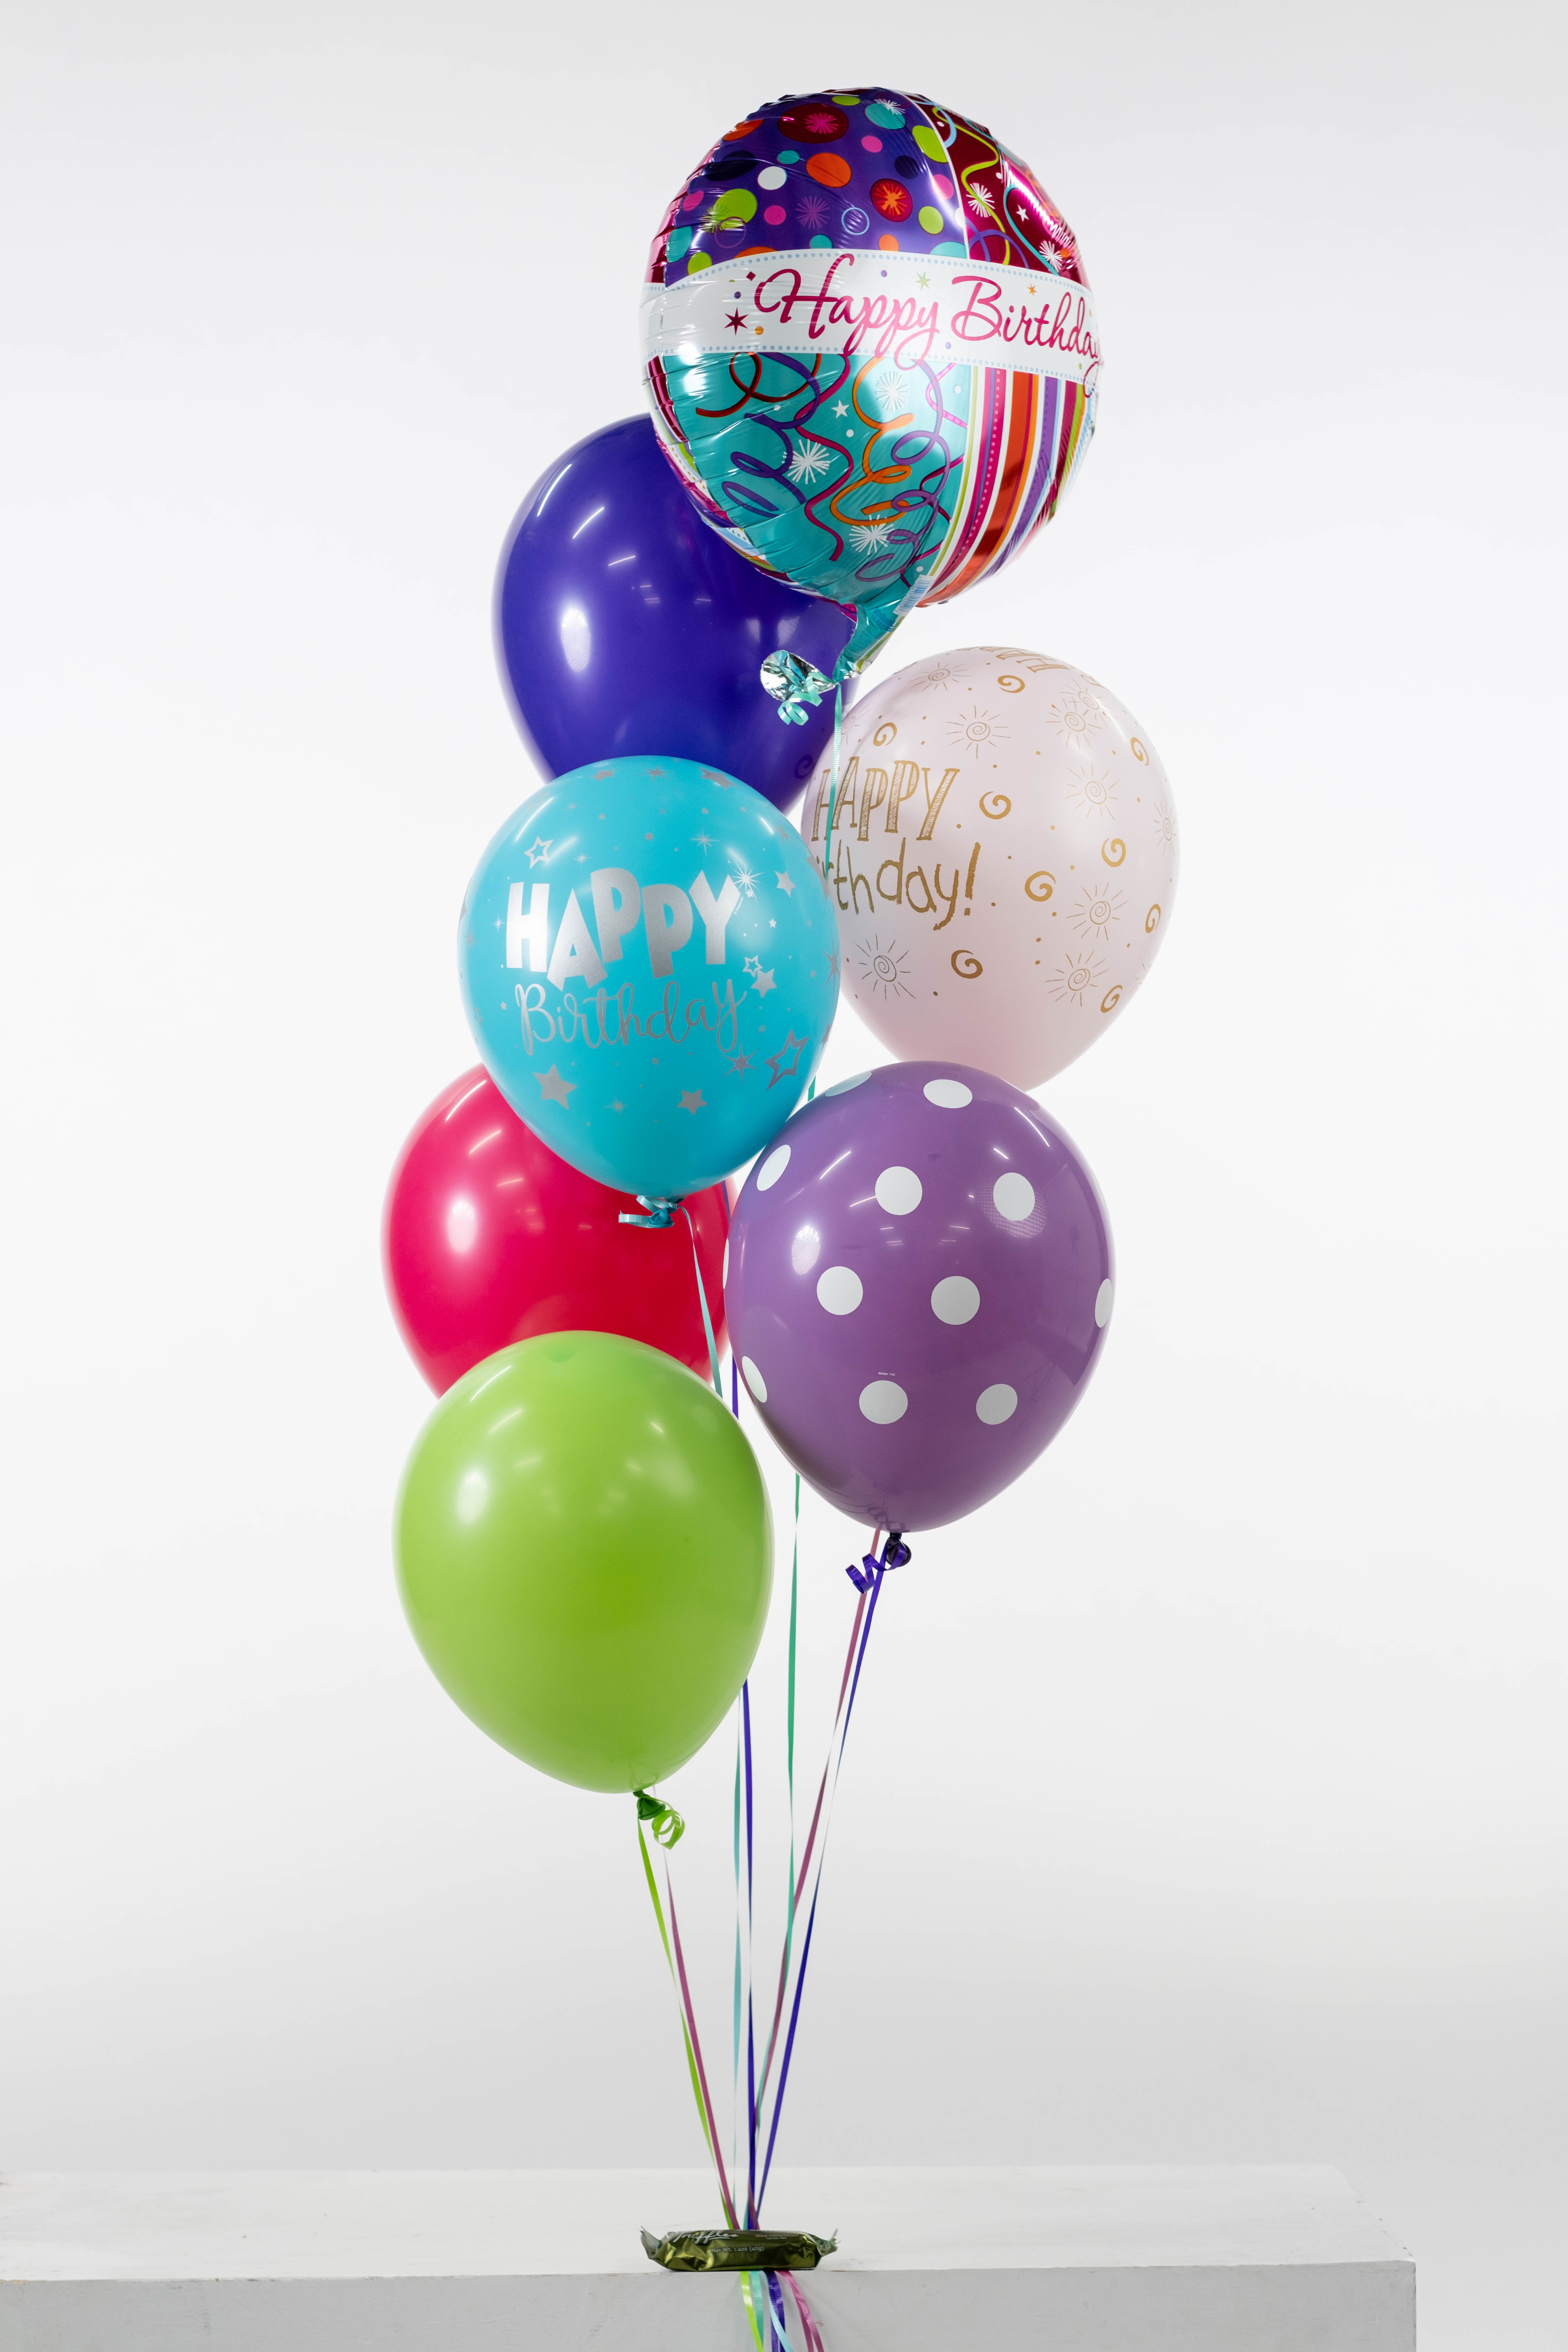 Balloon Special #2 -  ***PLEASE SPECIFY The occasion in the SPECIAL INSTRUCTIONS***  3 printed latex, 3 plain latex, 1 Mylar, 1 Utah Truffle weight We'll put together a fantastic grouping of various printed and plain balloons with your choice of 1 Mylar balloon to fit any occasion.  *ALL Sales are Final we cannot guarantee balloons due to varying weather conditions*